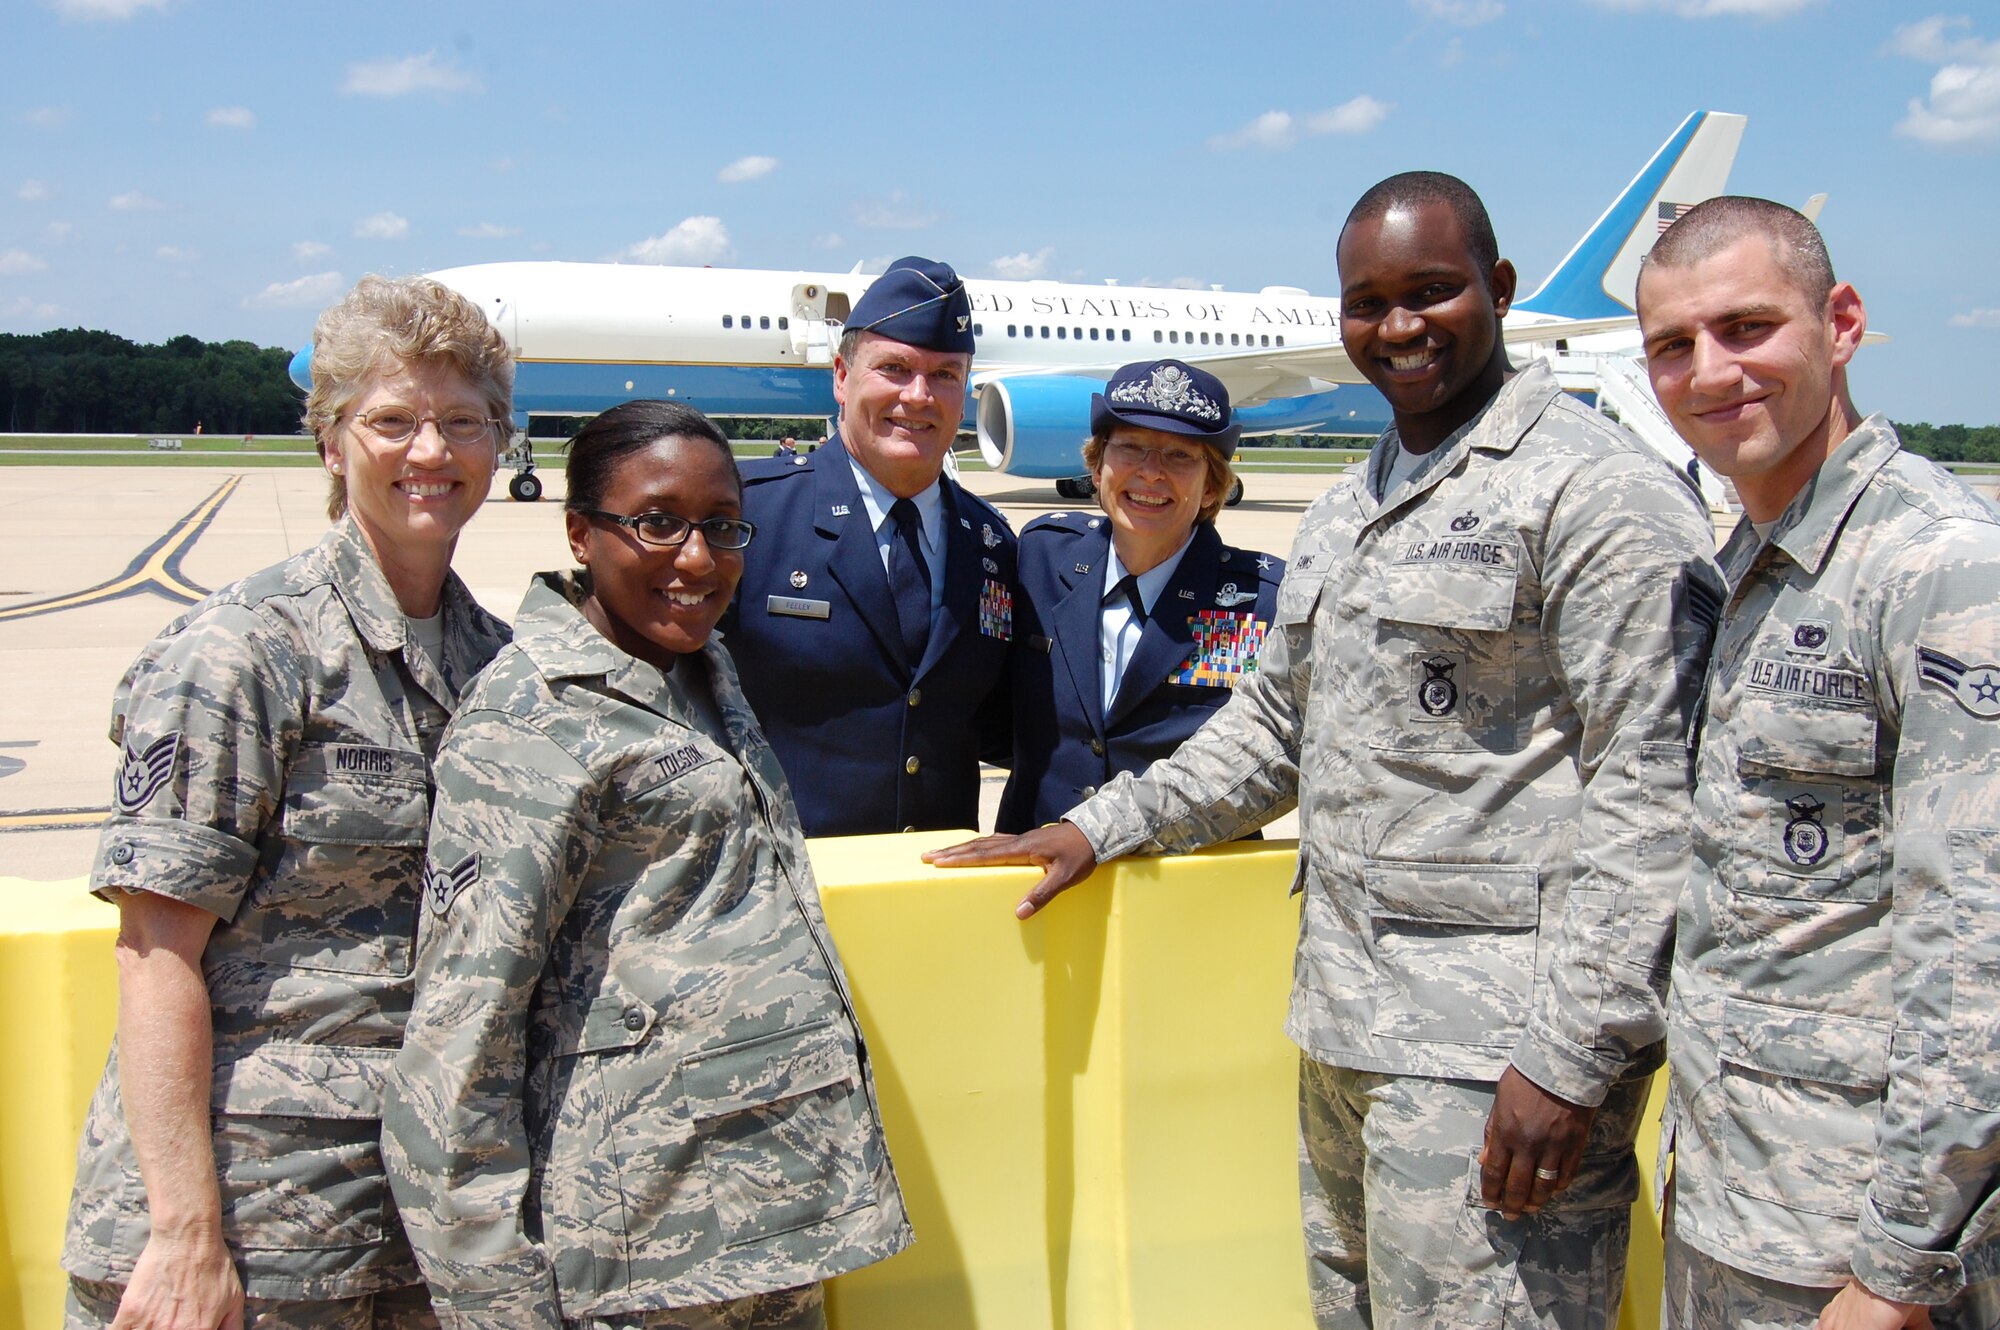 Staff Sgt. Gerilynn Norris, 166th Airlift Wing, Airman 1st Class Katesha Tolson, 166th Communications Flight, 166th Airlift Wing Commander Col. Mike Feeley, Delaware National Guard Assistant Adjutant General for Air Brig. Gen. Carol Timmons, Staff Sgt. Rahim Banks, 166th Security Forces Squadron, and Airman 1st Class Alvin Hall, 166th SFS pose for a photo with Air Force One in the background on July 17, 2014. U.S. President Barack Obama came to the home of the 166th Airlift Wing, Delaware Air National Guard en route to the Port of Wilmington, Delaware to announce a new initiative to increase private sector investment in our nation’s infrastructure. (U.S. Air National Guard photo by Tech. Sgt. Benjamin Matwey)